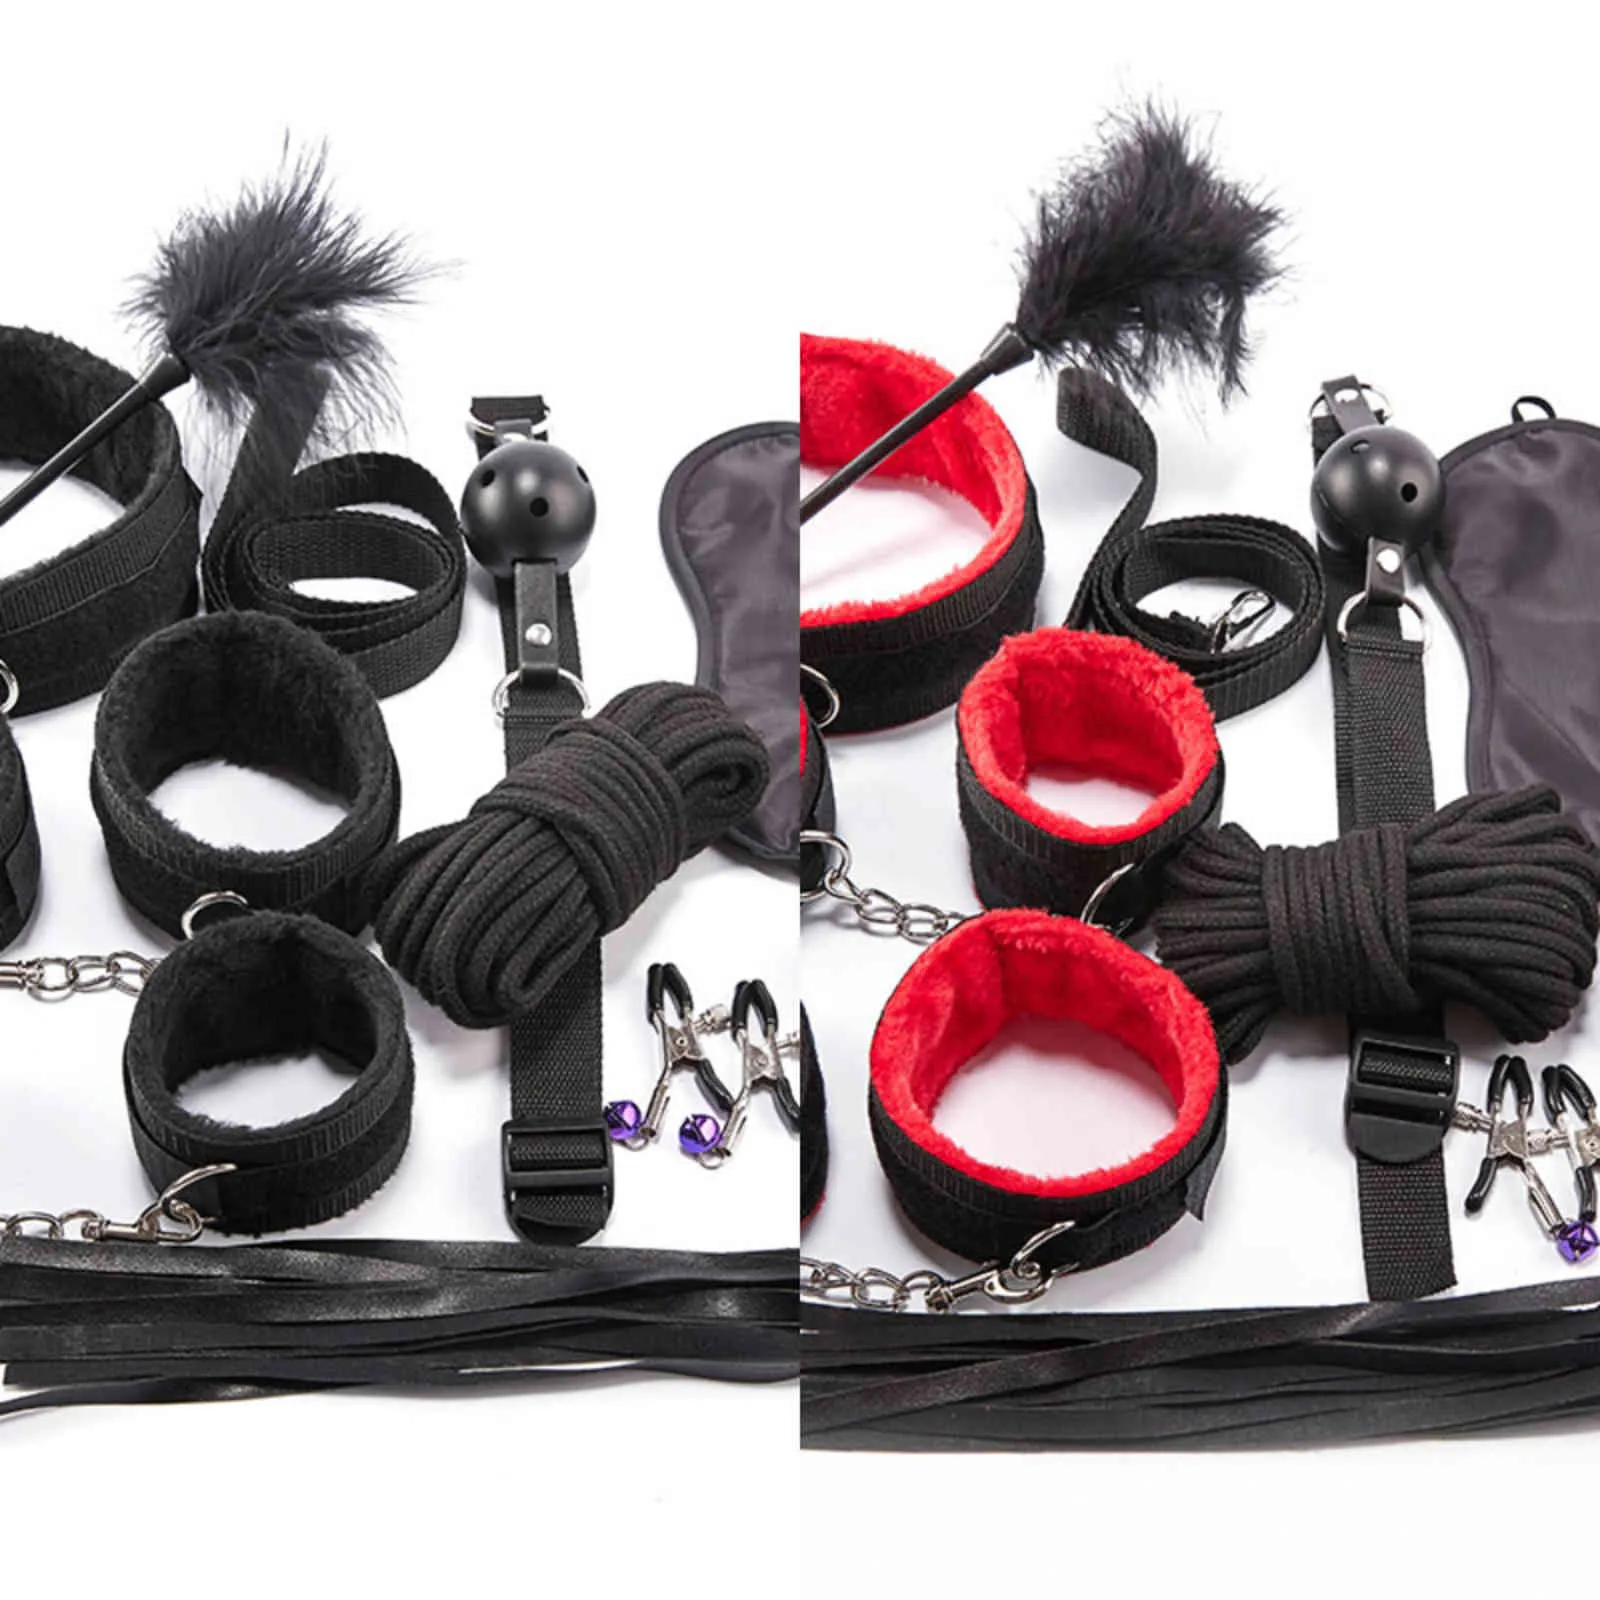 Bondages Black BDSM Kits Sex Products Erotic Toys Adults Bondage Set  Handcuffs Nipple Clamps Gag Whip Rope For Couples 1122 From Sexvibrators,  $13.91